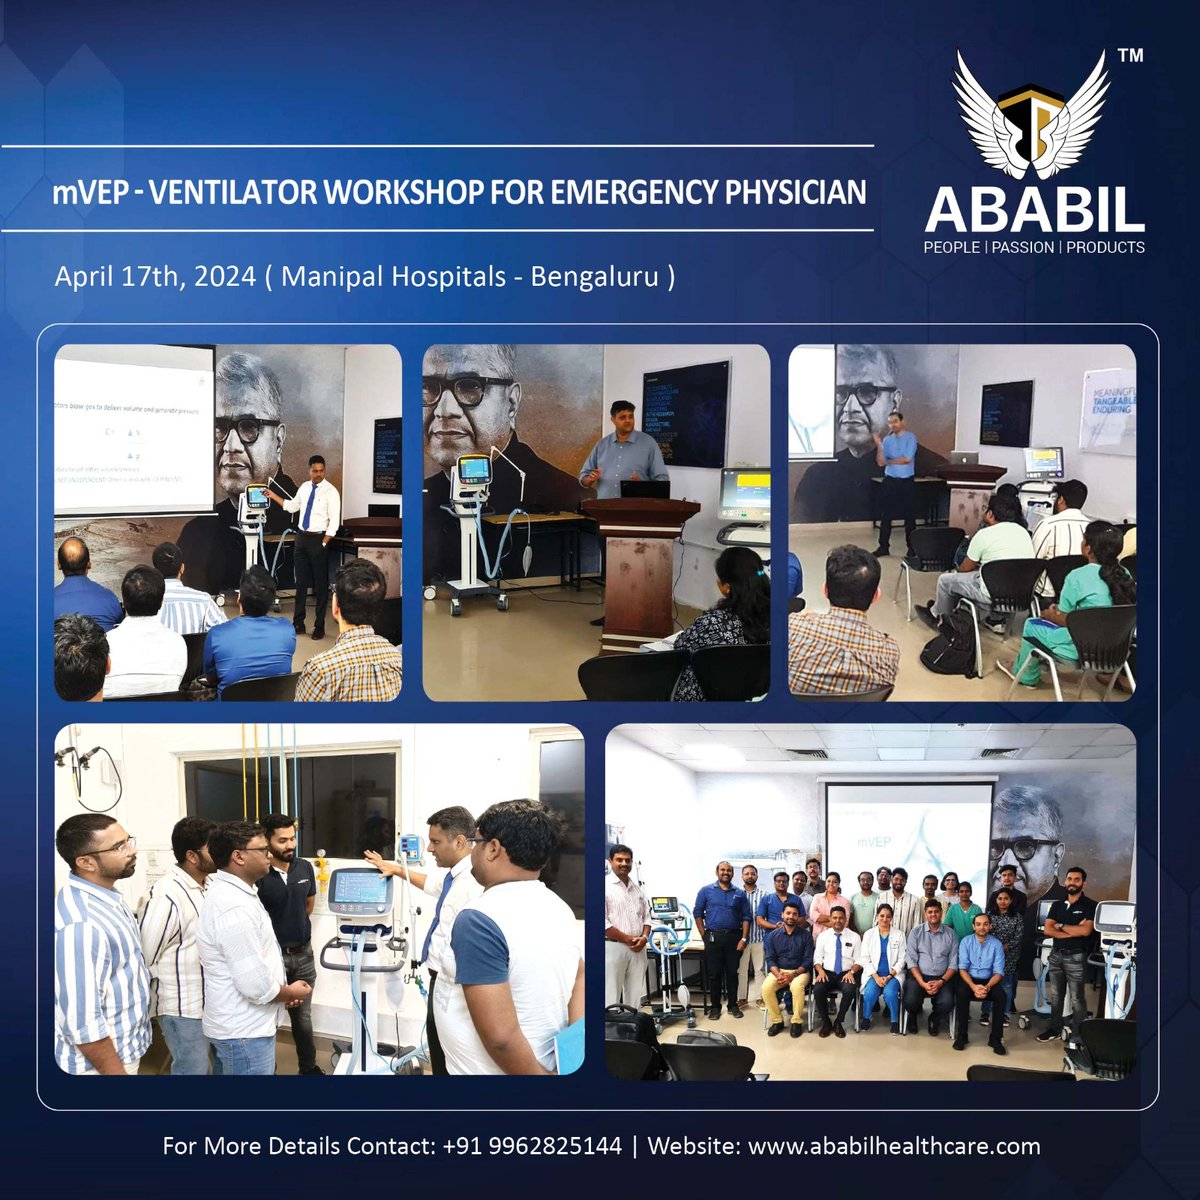 🌟 We're excited to share the grand success of our mVEP Ventilator Workshop for Emergency Physicians, held in collaboration with Manipal Hospitals, Bangalore! 🏥💨

#AbabilHealthcare #VentilatorWorkshop  #CriticalCare #ManipalHospitals  #MedicalEducation  #HamiltonMedical